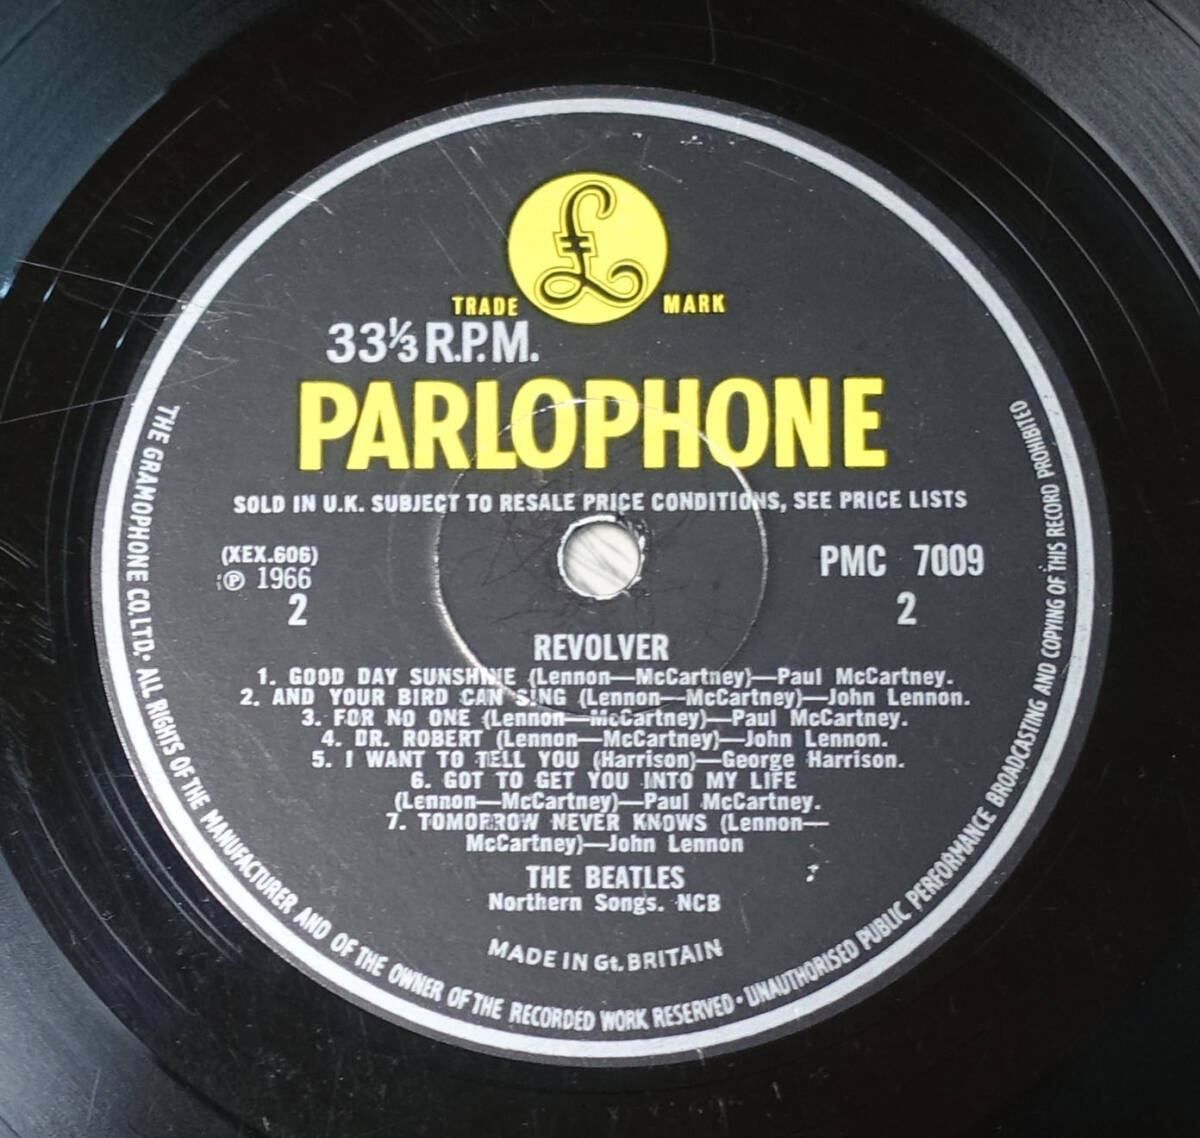 UK Original the first times Parlophone PMC 7009 REVOLVER 1st REMIX-11 / The Beatles MAT: XEX 606-1